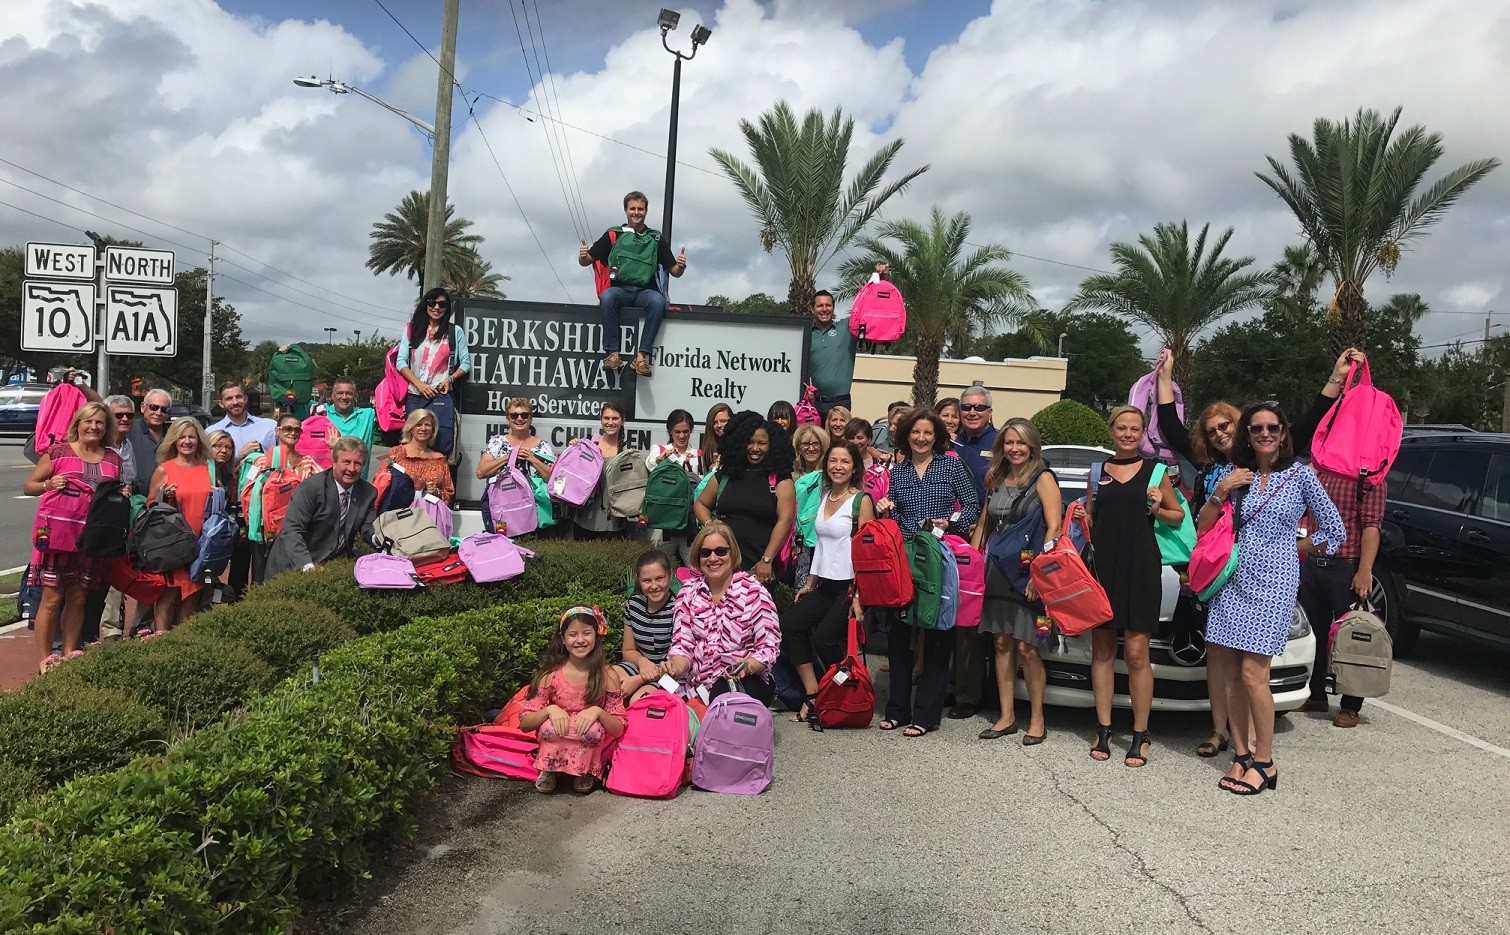 Berkshire Hathaway HomeServices Florida Network Realty employees display donated backpacks outside of the company’s office in in Atlantic Beach.